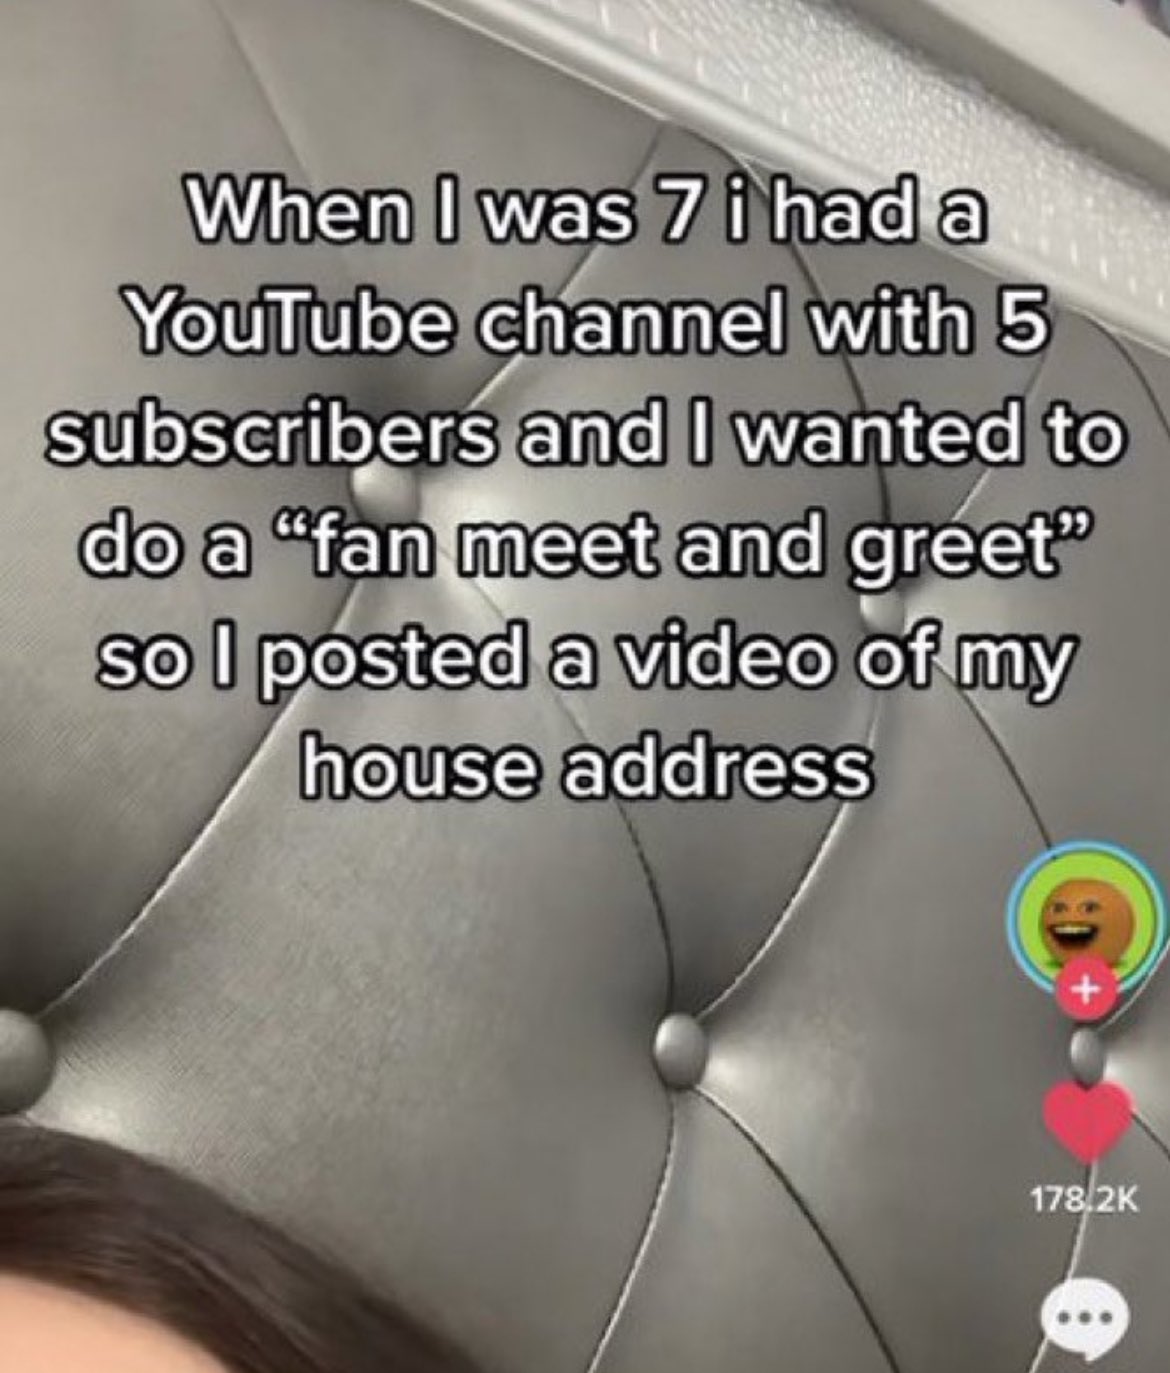 wild tiktok screenshots - wanted to do a fan meet - When I was 7 i had a YouTube channel with 5 subscribers and I wanted to do a "fan meet and greet" so I posted a video of my house address